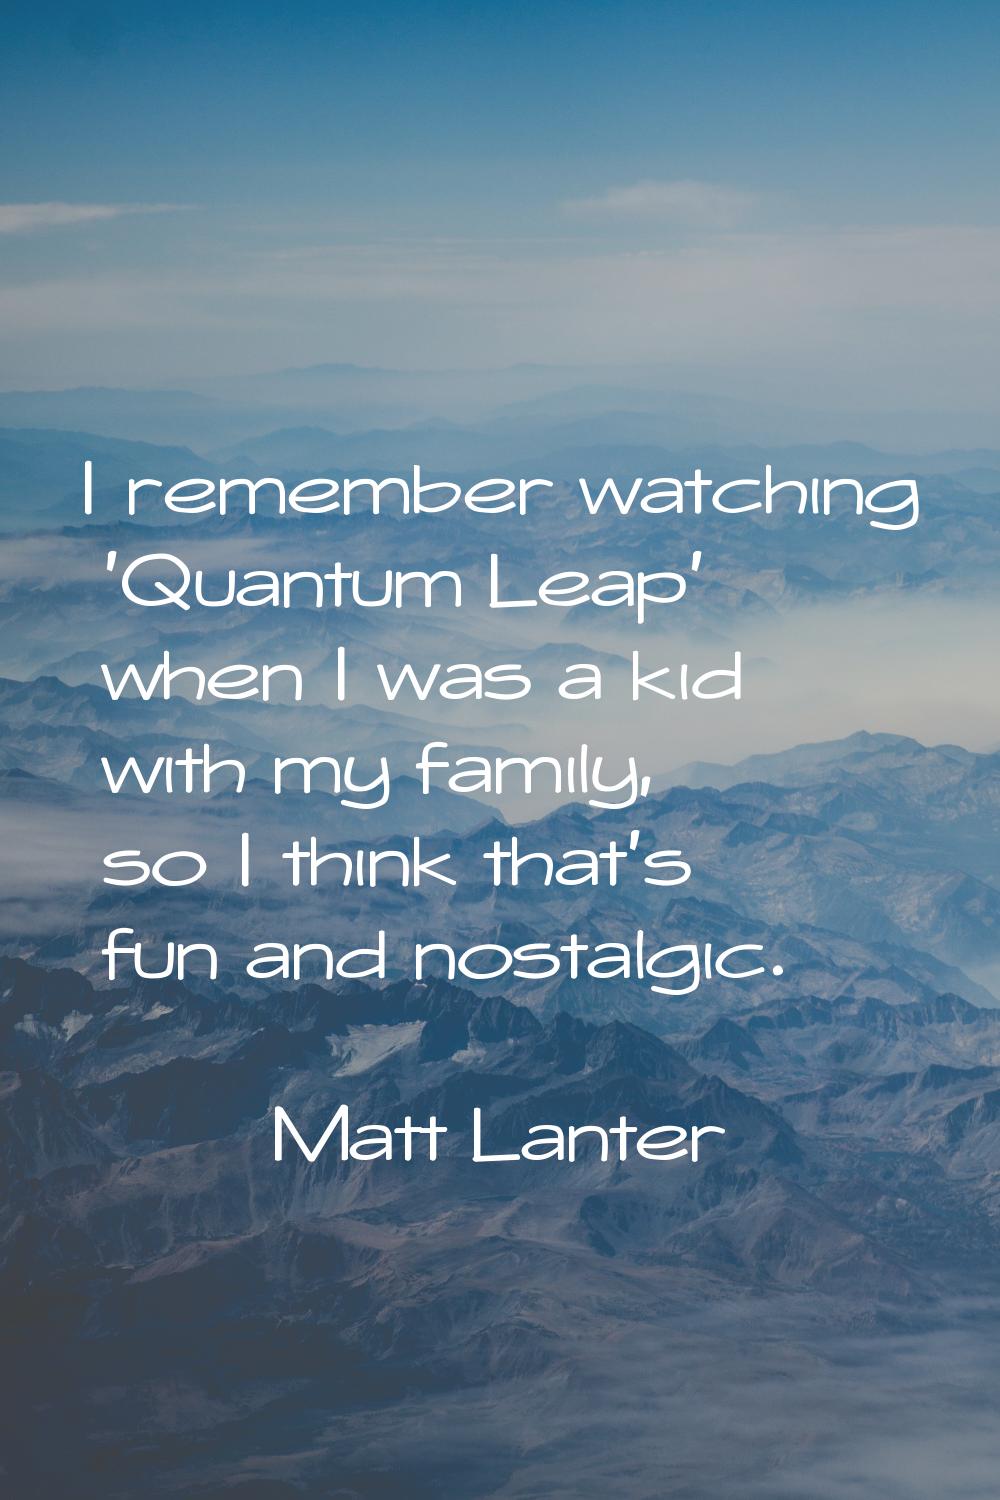 I remember watching 'Quantum Leap' when I was a kid with my family, so I think that's fun and nosta